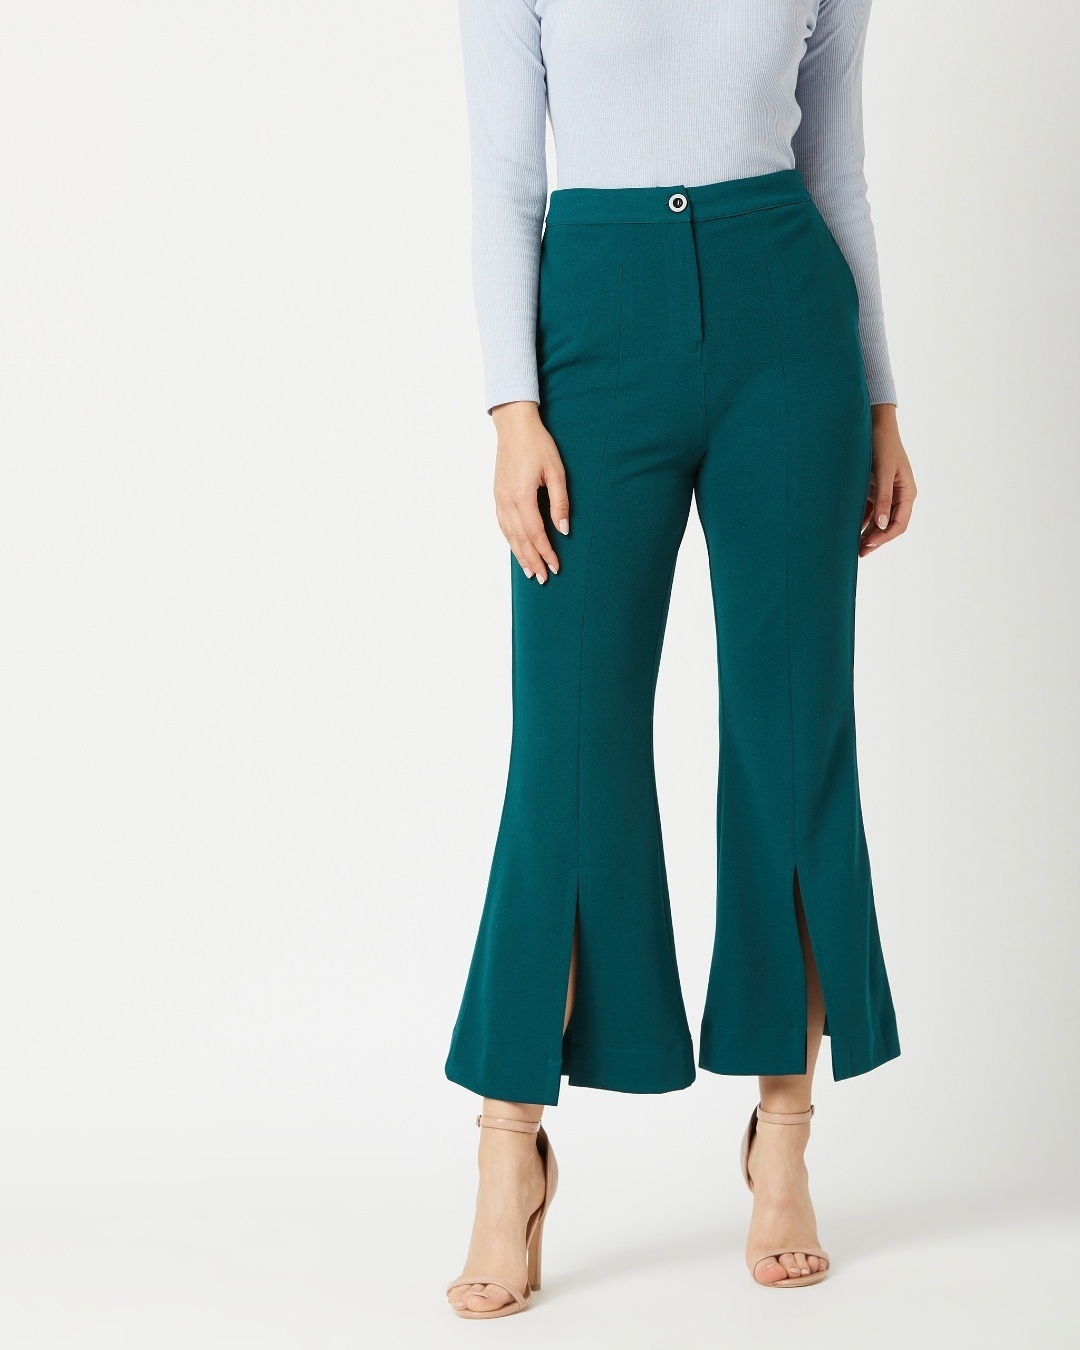 CottonPolyester Plus Size Womens Pants or Trousers